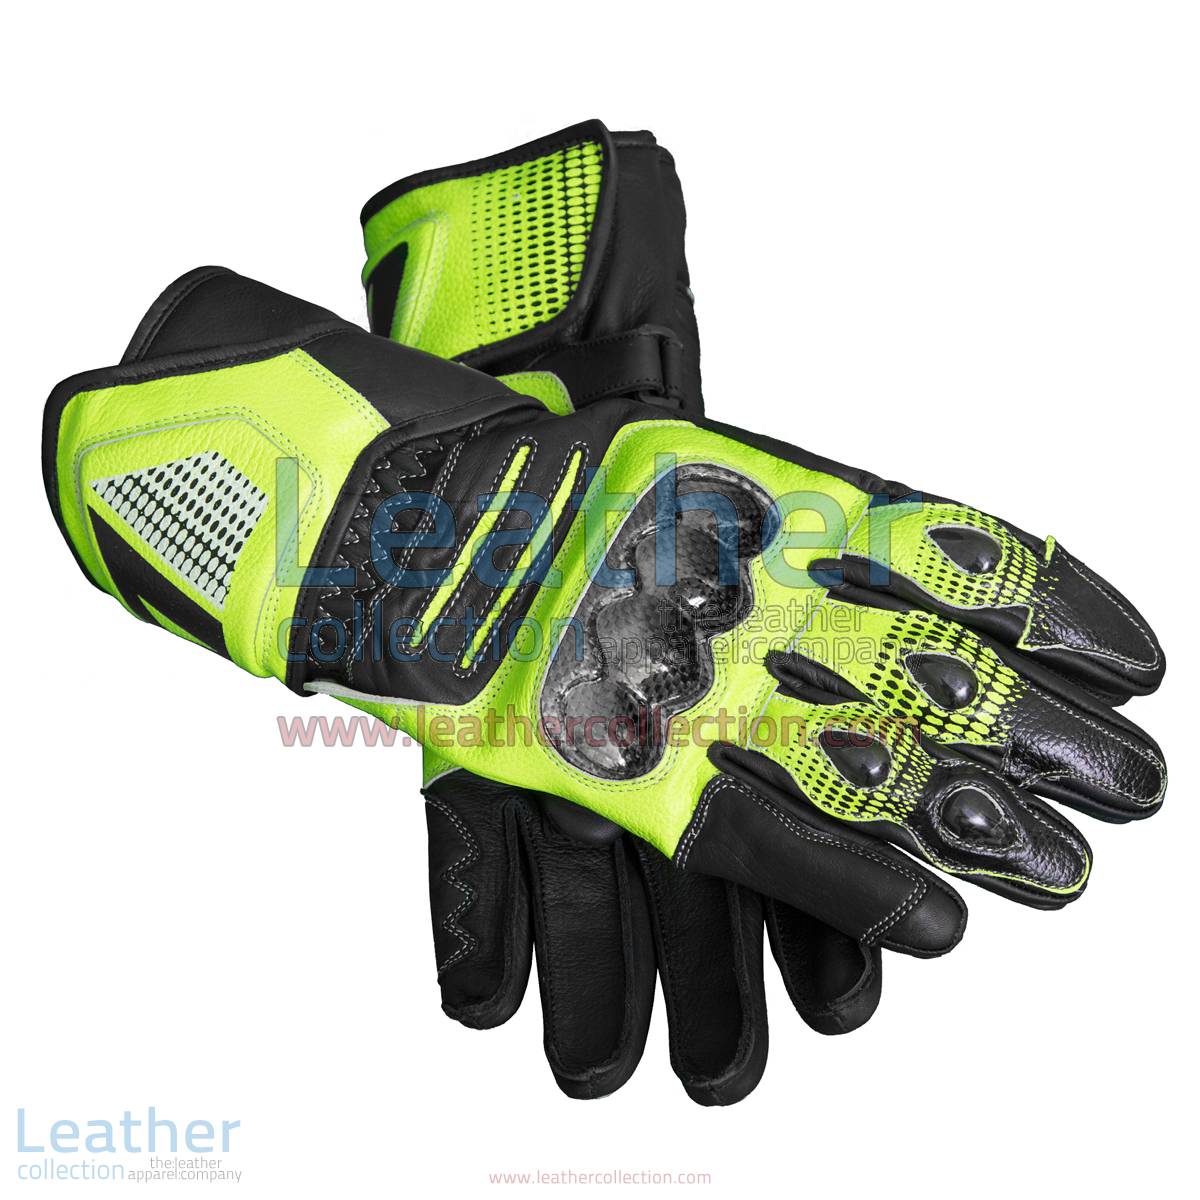 Valentino Rossi Motorcycle Race Gloves | Valentino Rossi gloves,Motorcycle race gloves